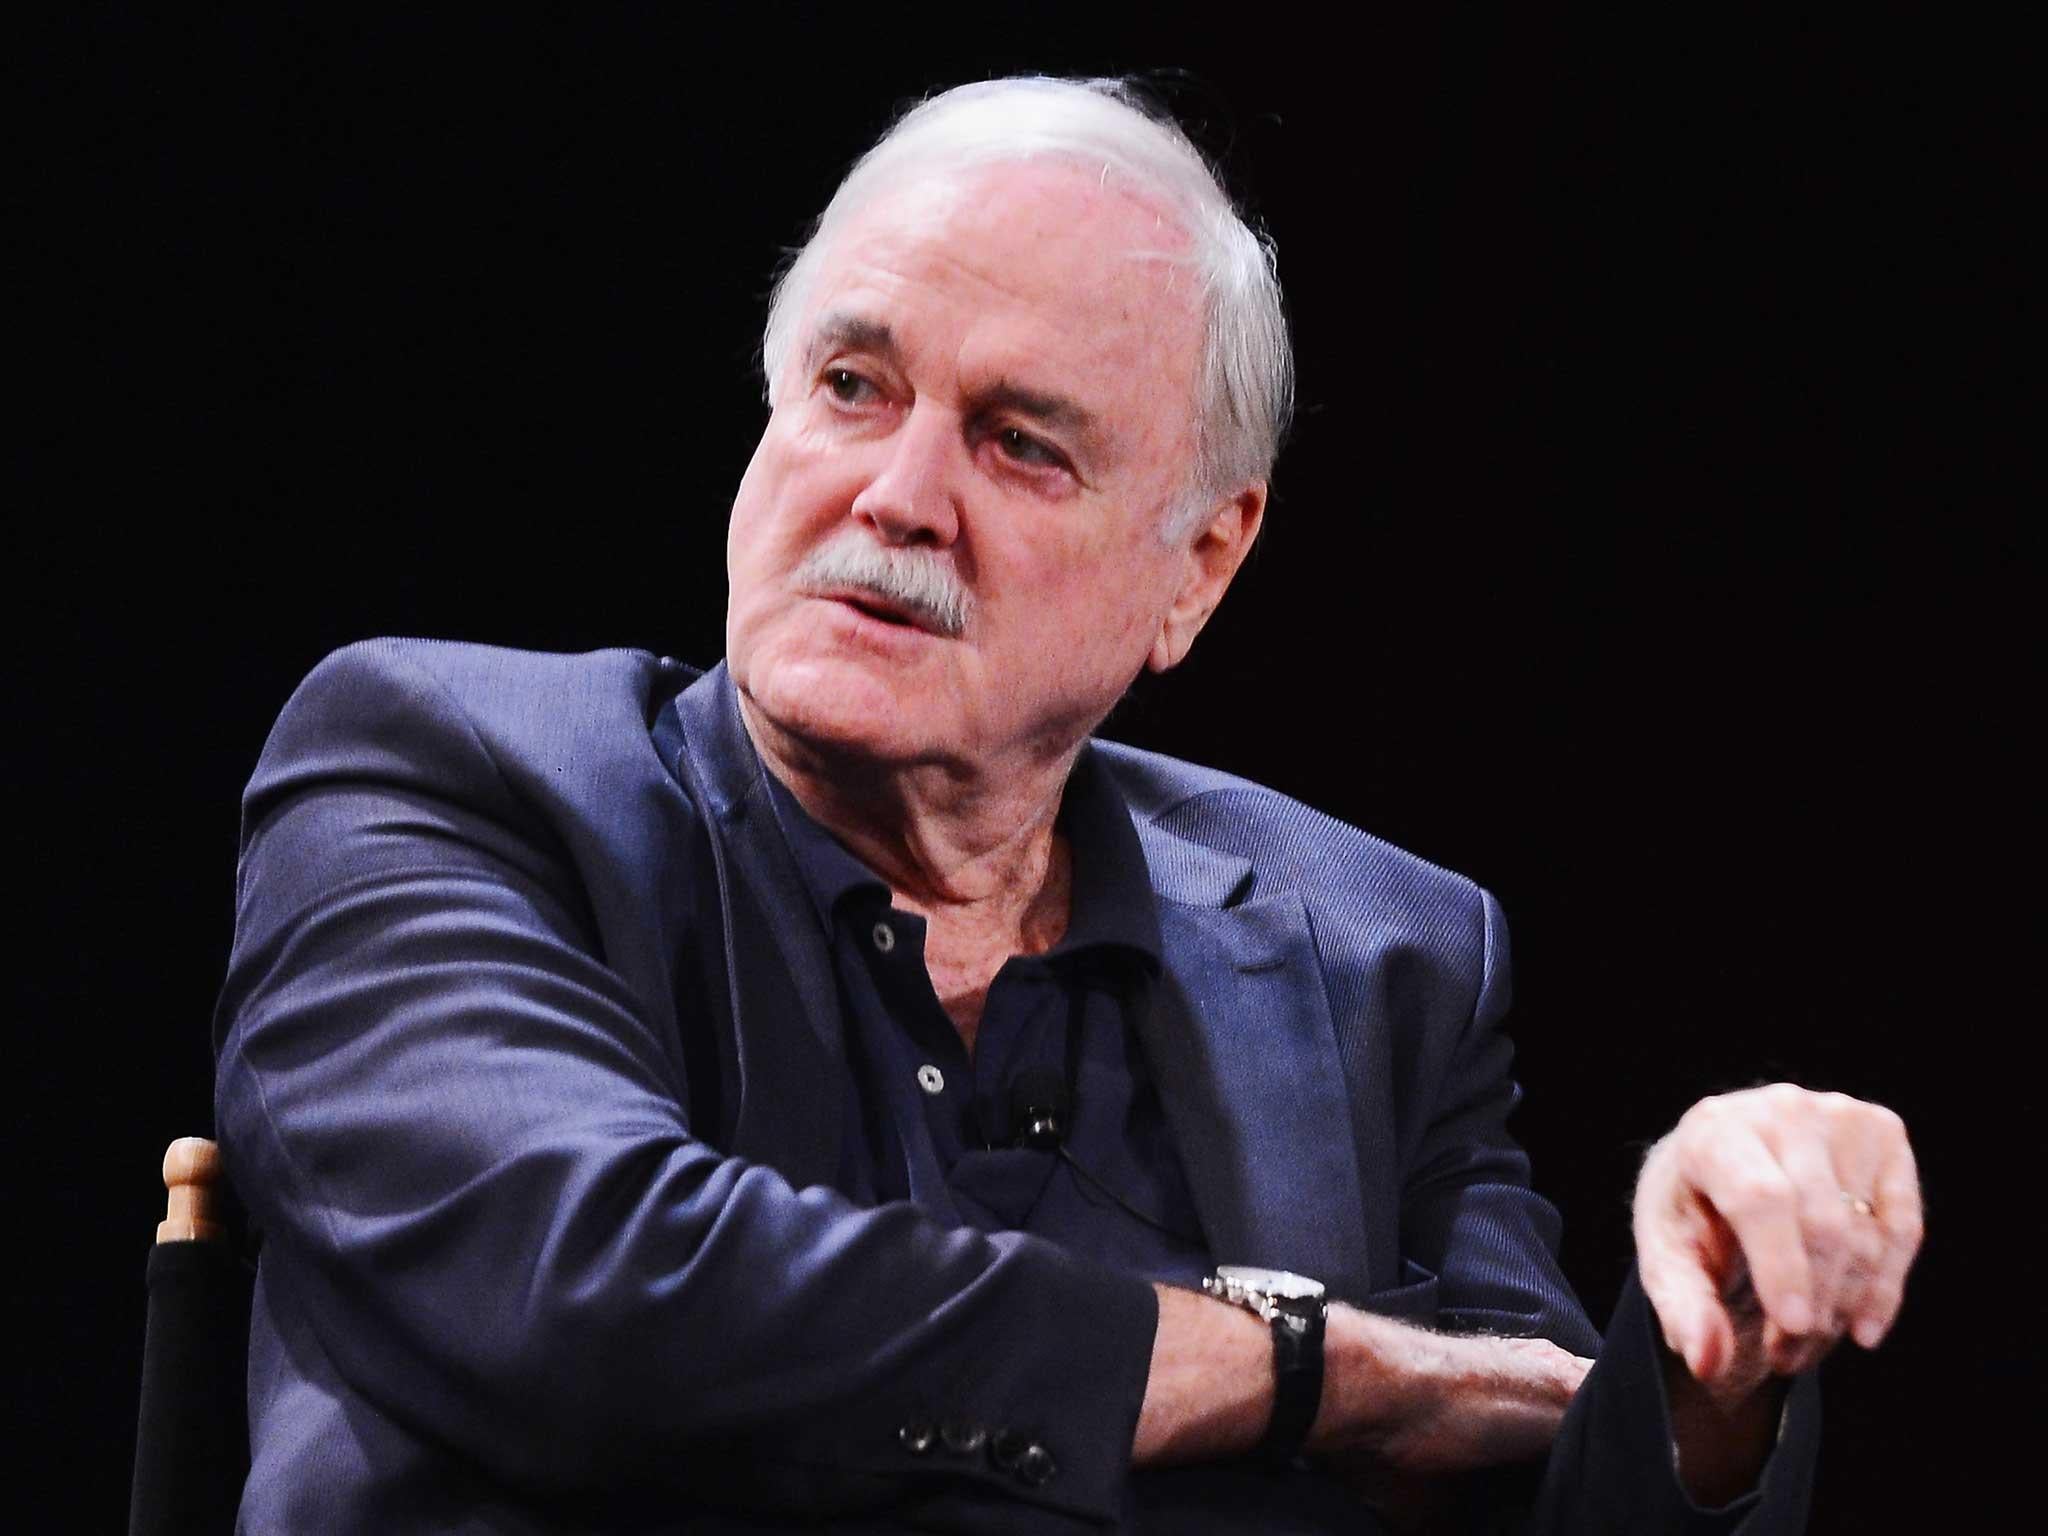 Cleese says he plans to move to the small island of Nevis, which has a population of just 11,000